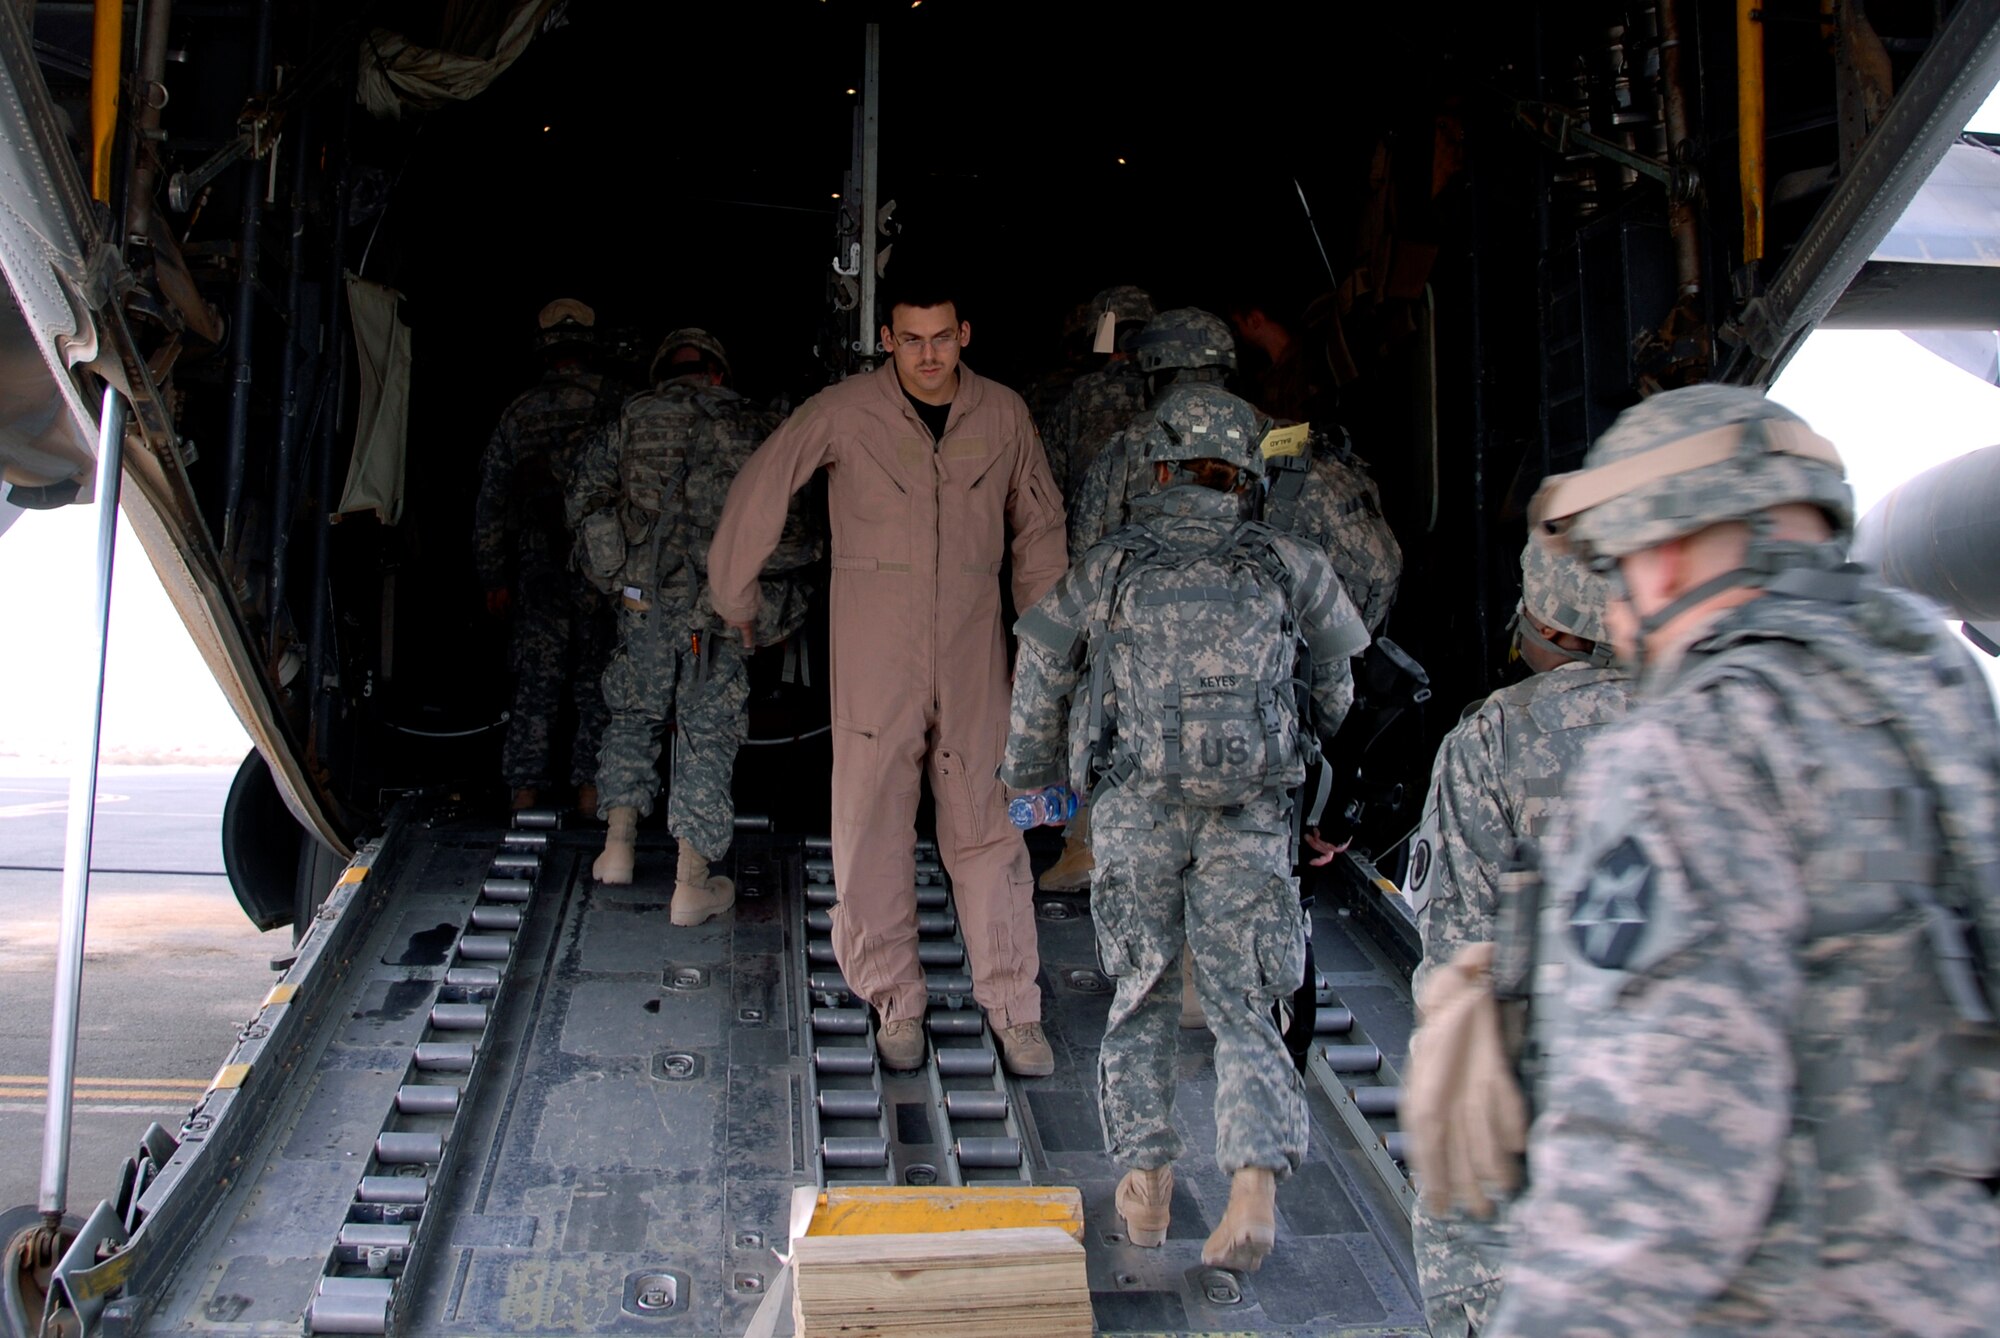 SOUTHWEST ASIA -- Airman 1st Class Armando Baez, a C-130 Hercules loadmaster deployed to the 737th Expeditionary Airlift Squadron, guides Soldiers onto the aircraft in preparation for the combat sortie that transported the Soldiers into Iraq April 21, 2008, from an air base in the Persian Gulf Region. The Air Force recently surpassed more than one million sorties flown by Air Force aircraft in the Global War on Terror since Sept. 11, 2001. Synchronized and integrated into larger coalition air efforts, these missions represent the most deliberate, disciplined and precise air campaign in history. Airman Baez is deployed from the 39th Airlift Squadron, Dyess Air Force Base, Texas. (U.S. Air Force photo/ Staff Sgt. Patrick Dixon)